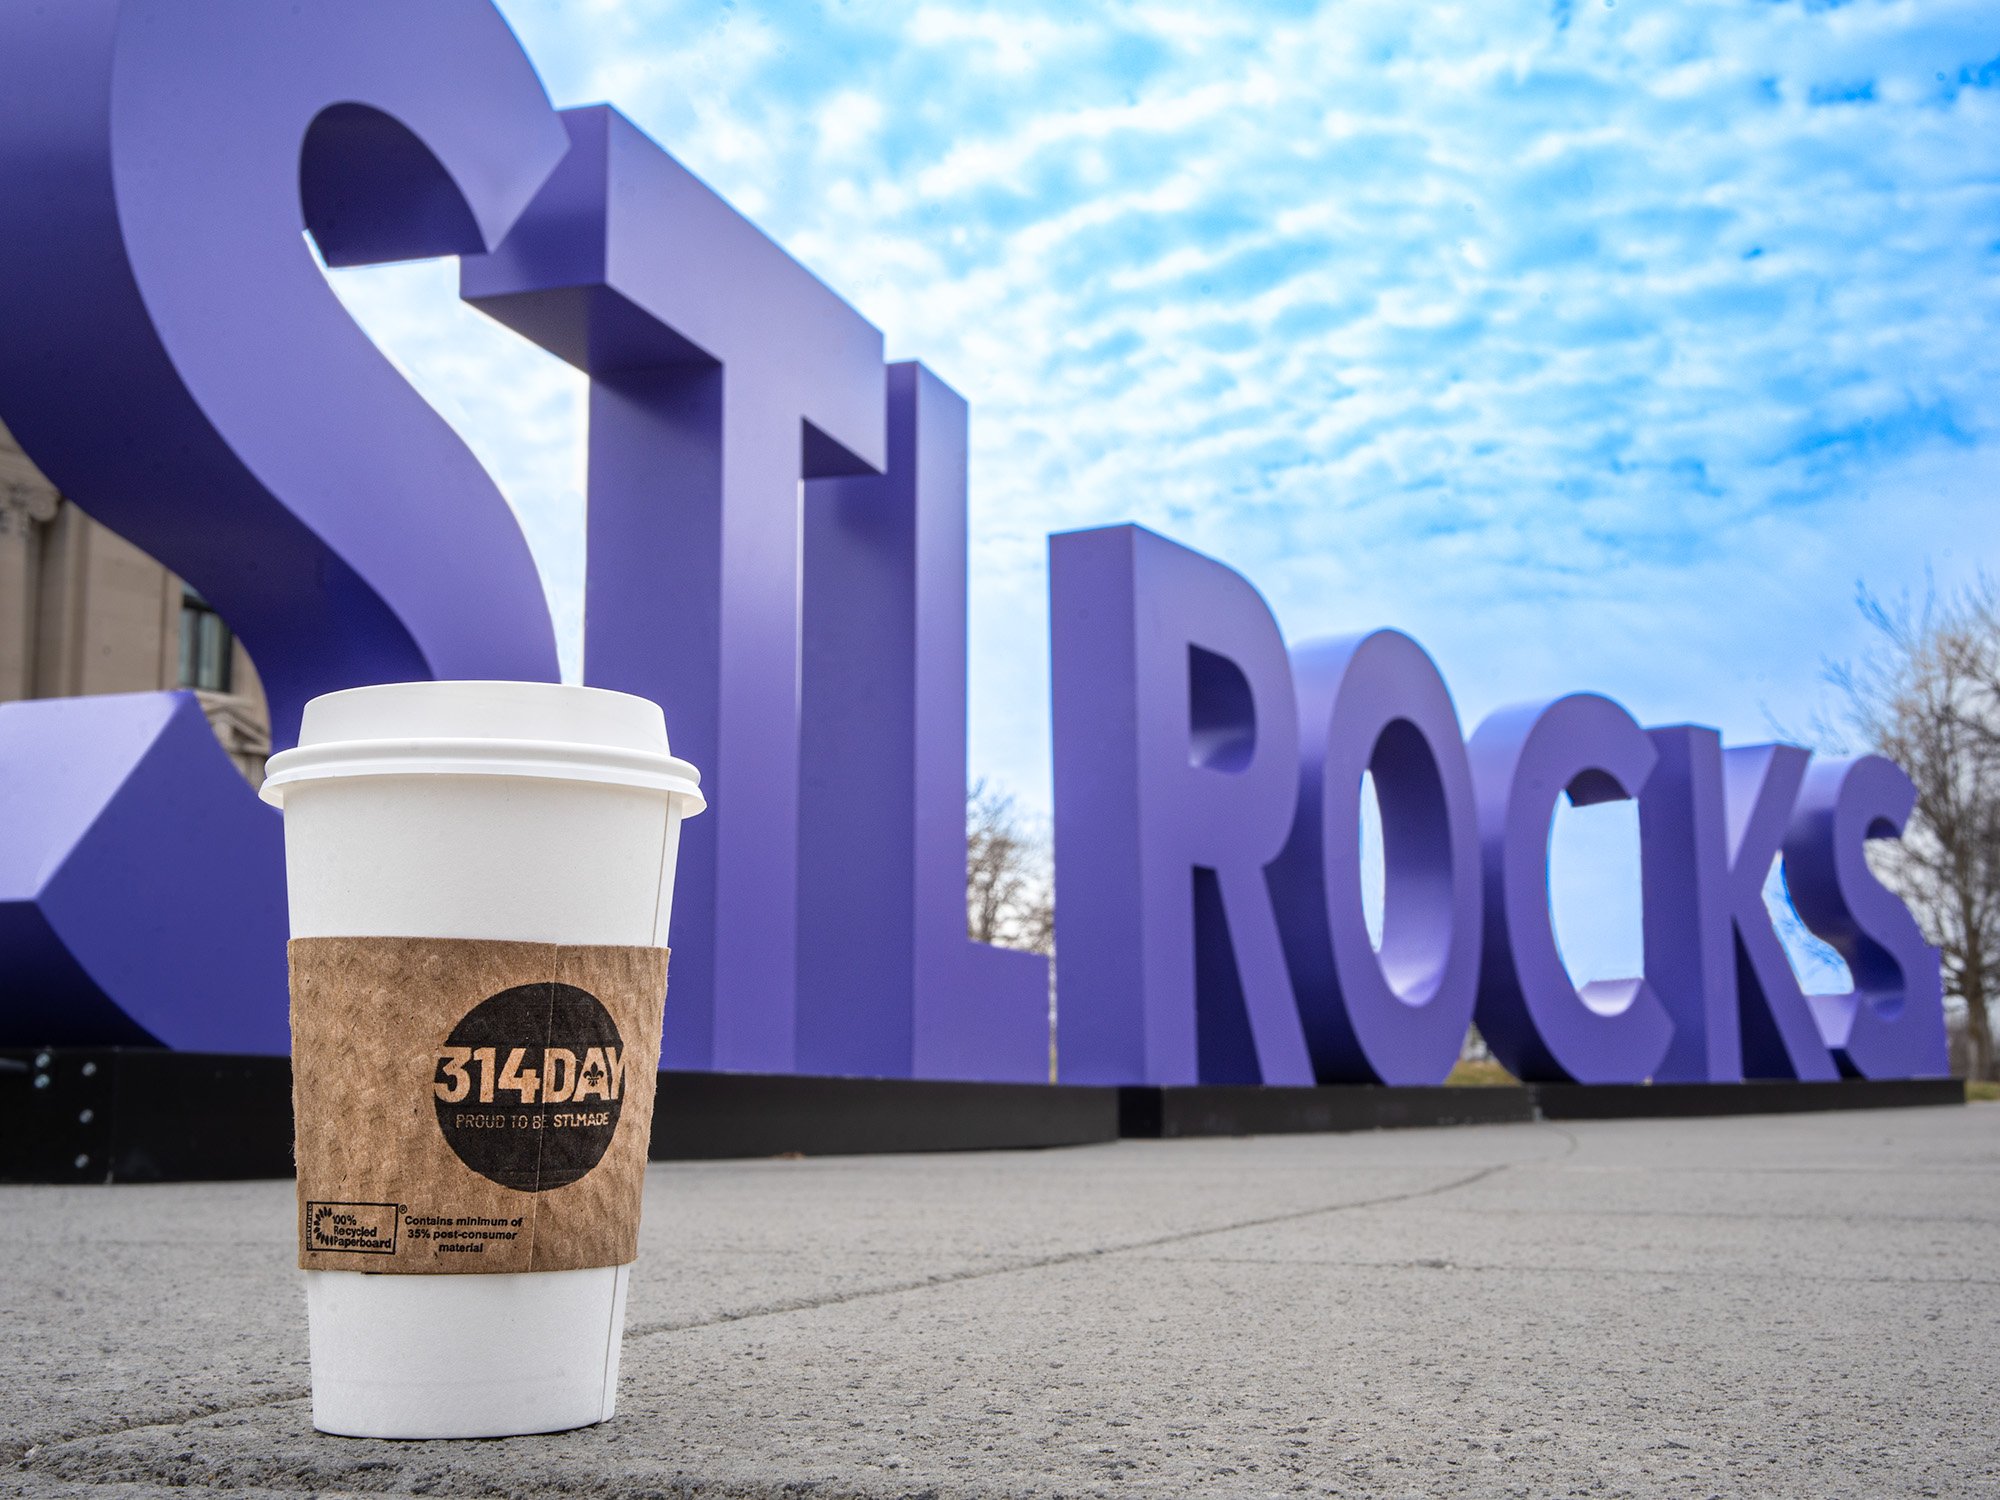 Hot cup in front of an STL Rocks sign